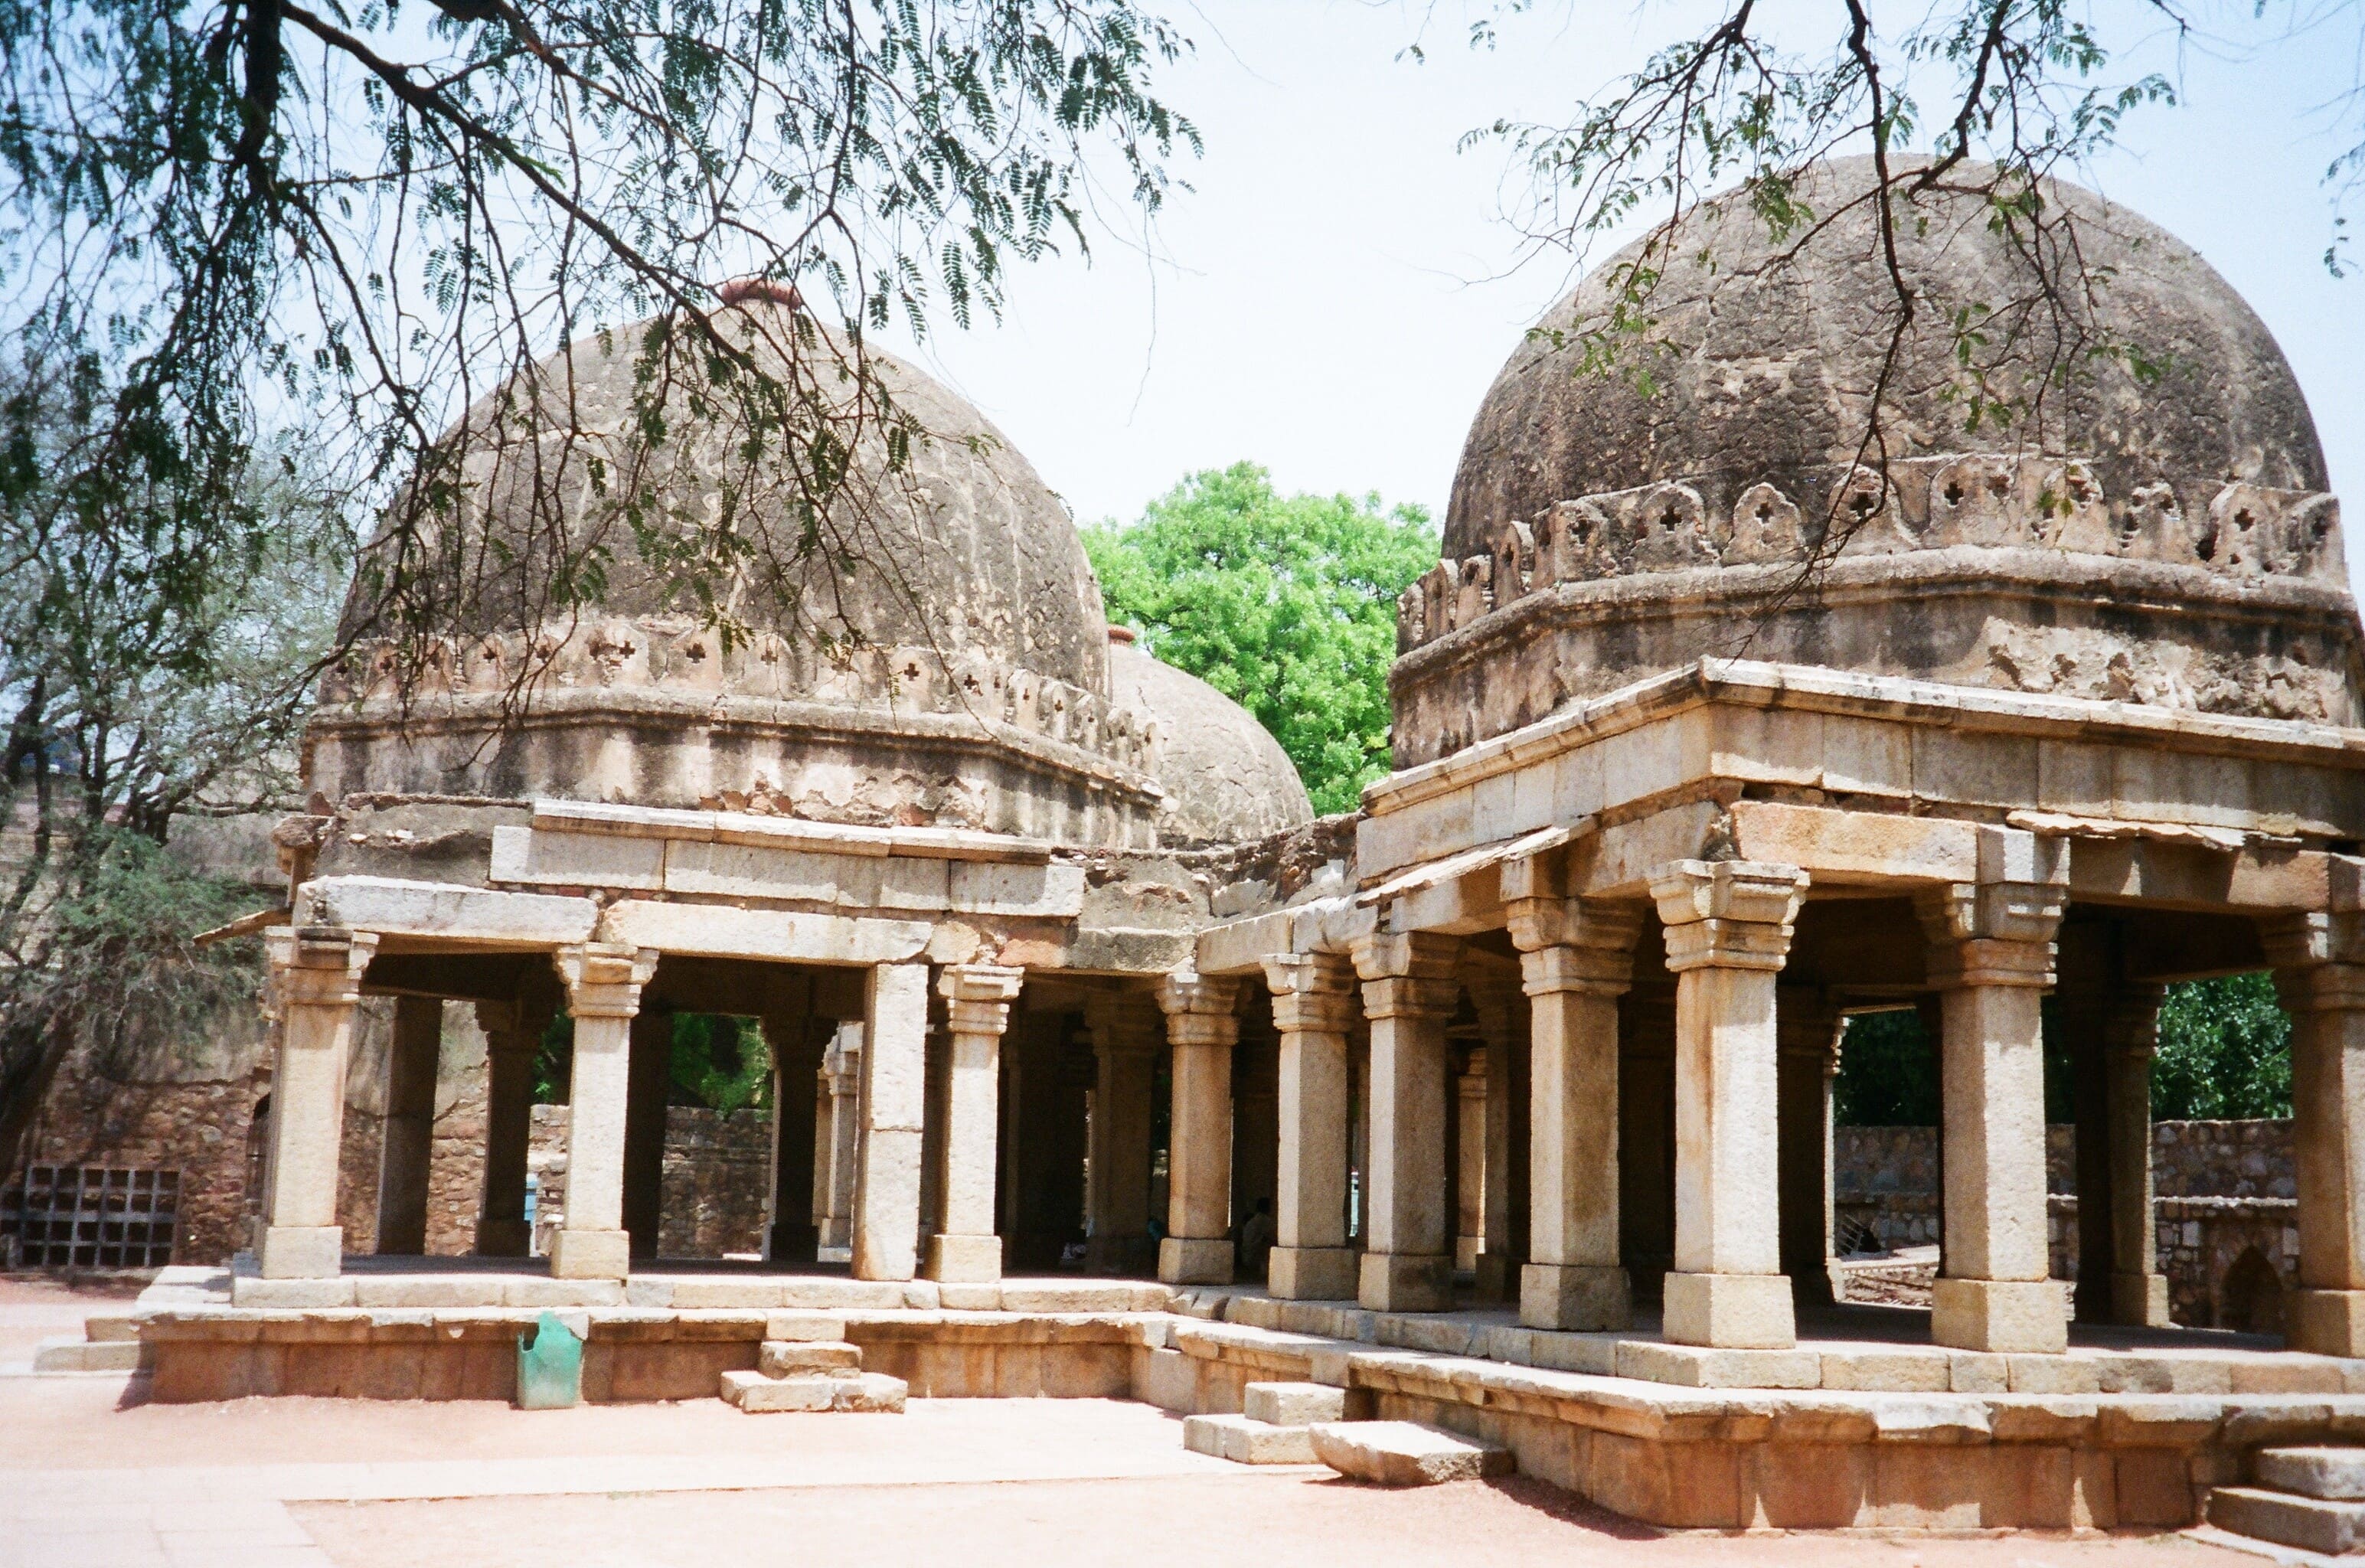 Tombs in the front courtyard of the Hauz Khas